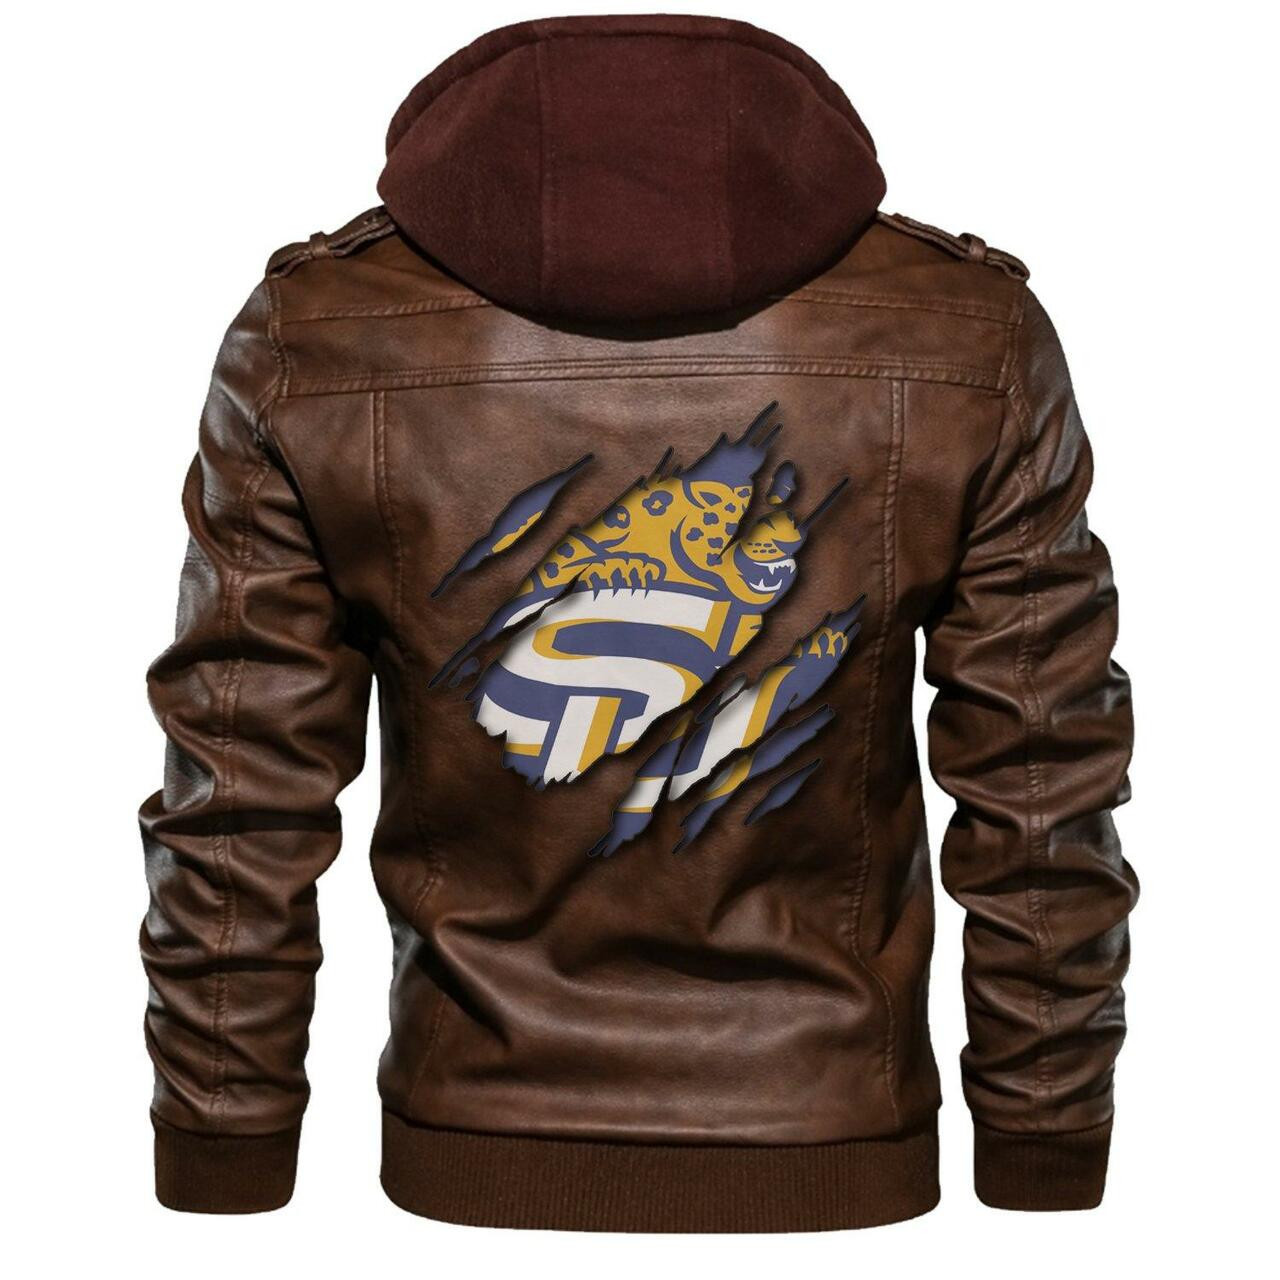 If you're looking for a trendy shirt hoodie, check out below 23